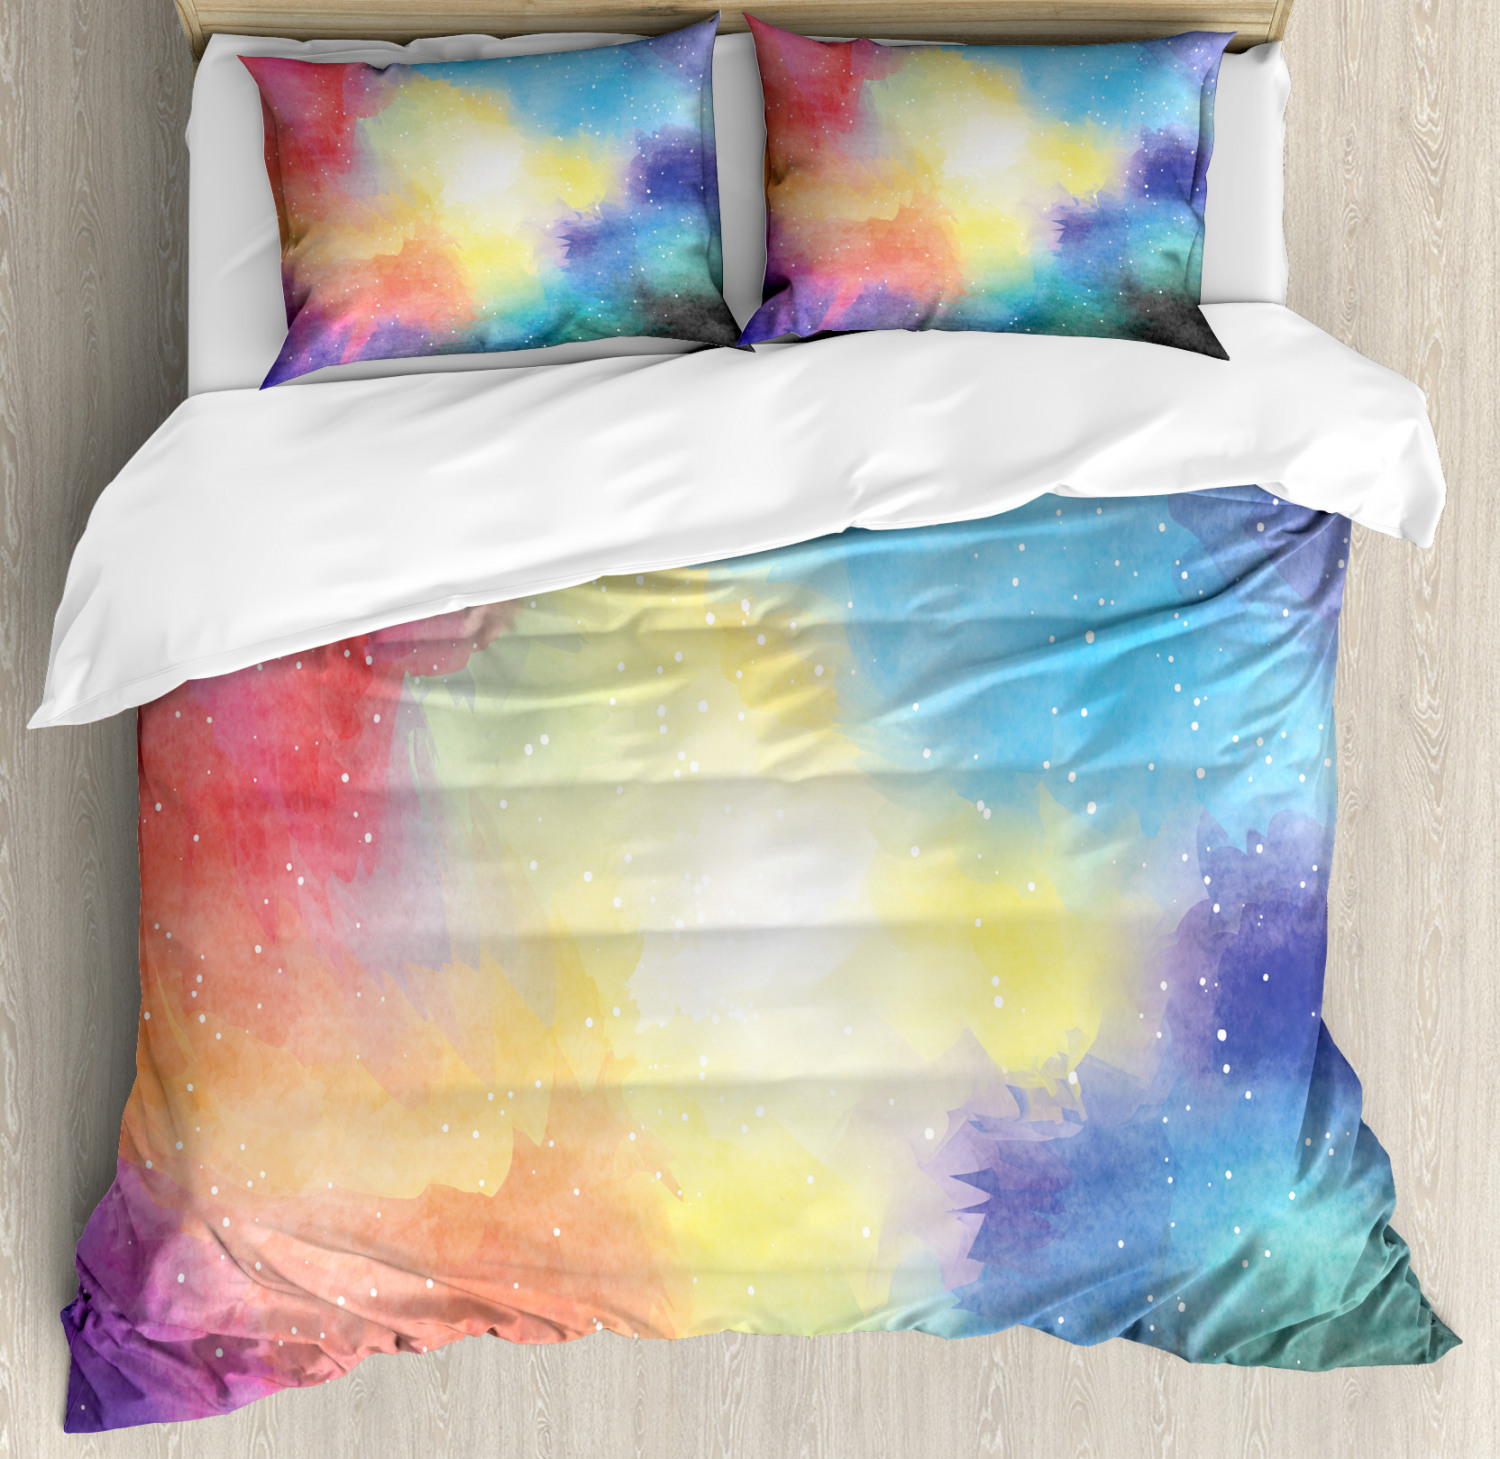 Outer Space Duvet Cover Set With Pillow Shams Watercolor Nebula